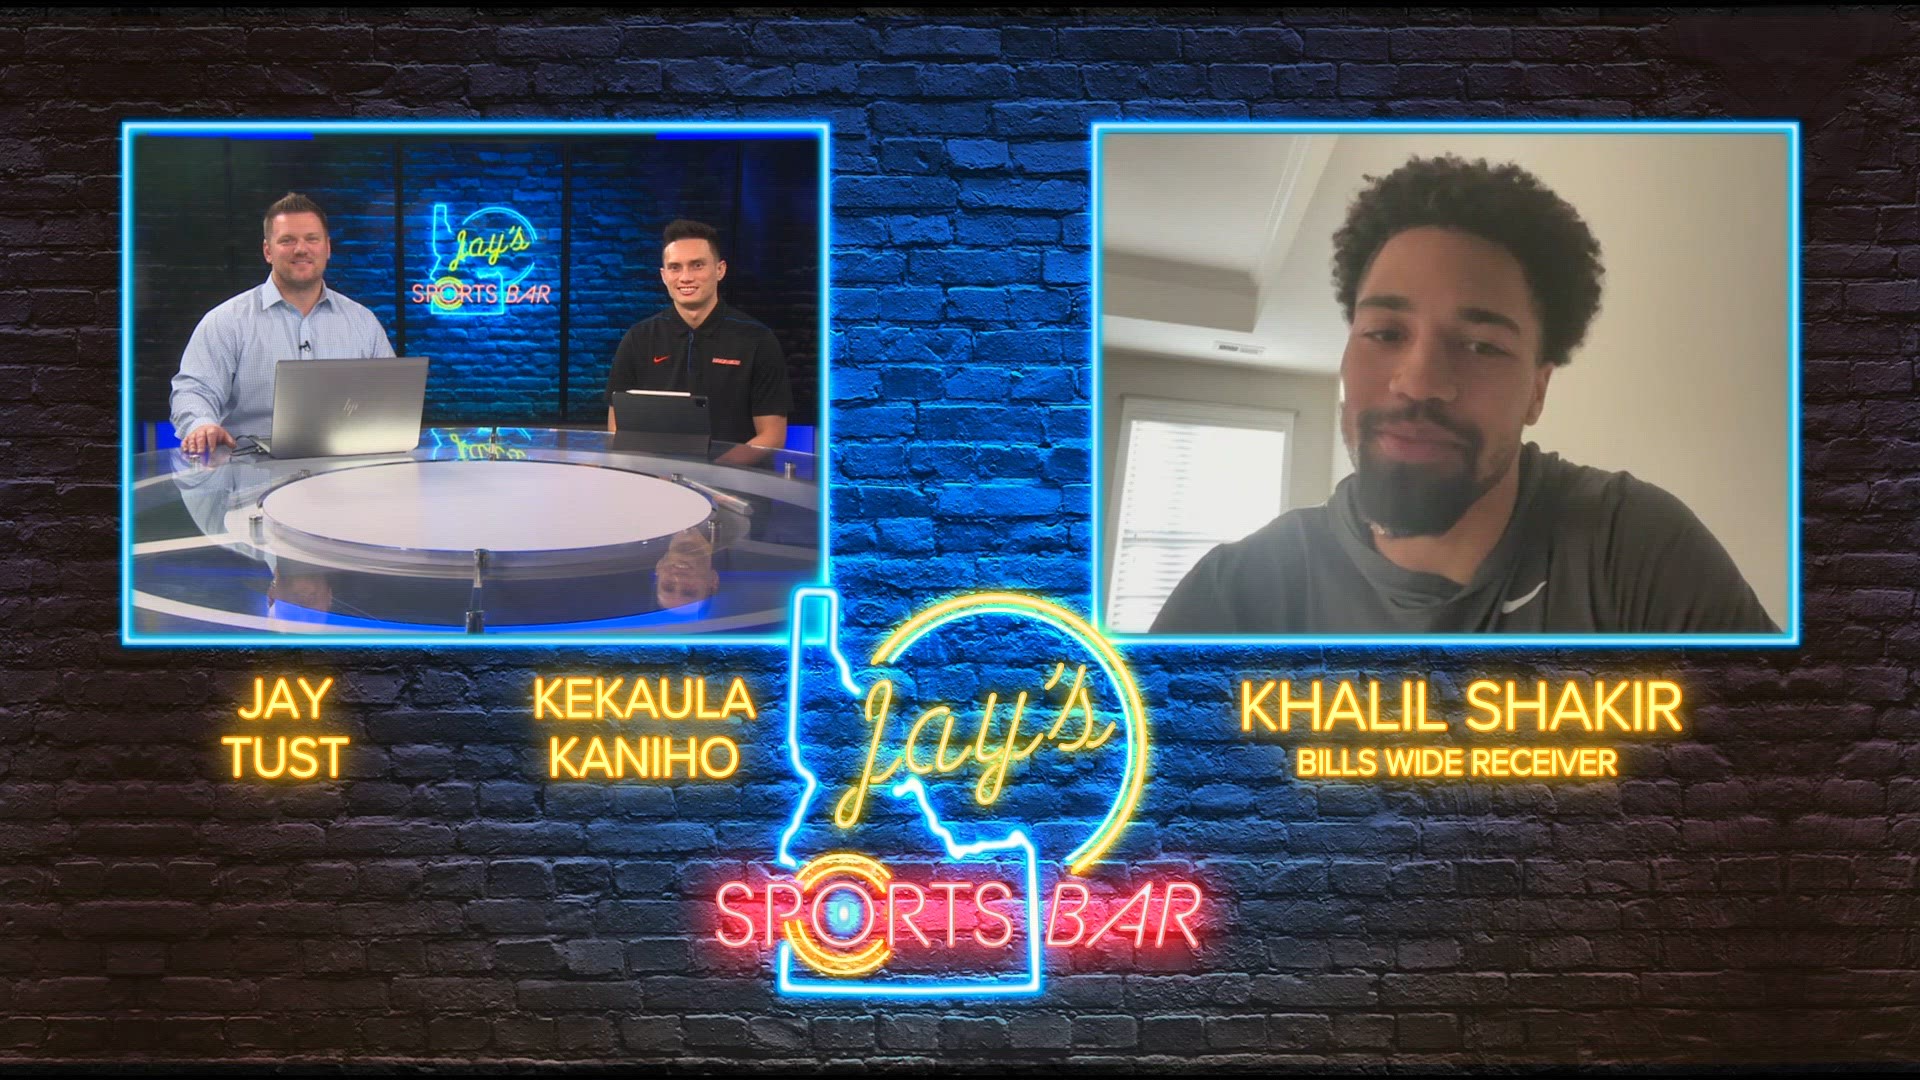 On the first episode of the Super Bowl Series, Buffalo Bills wide receiver Khalil Shakir joins KTVB's Jay Tust and former Bronco Kekaula Kaniho on Jay's Sports Bar.